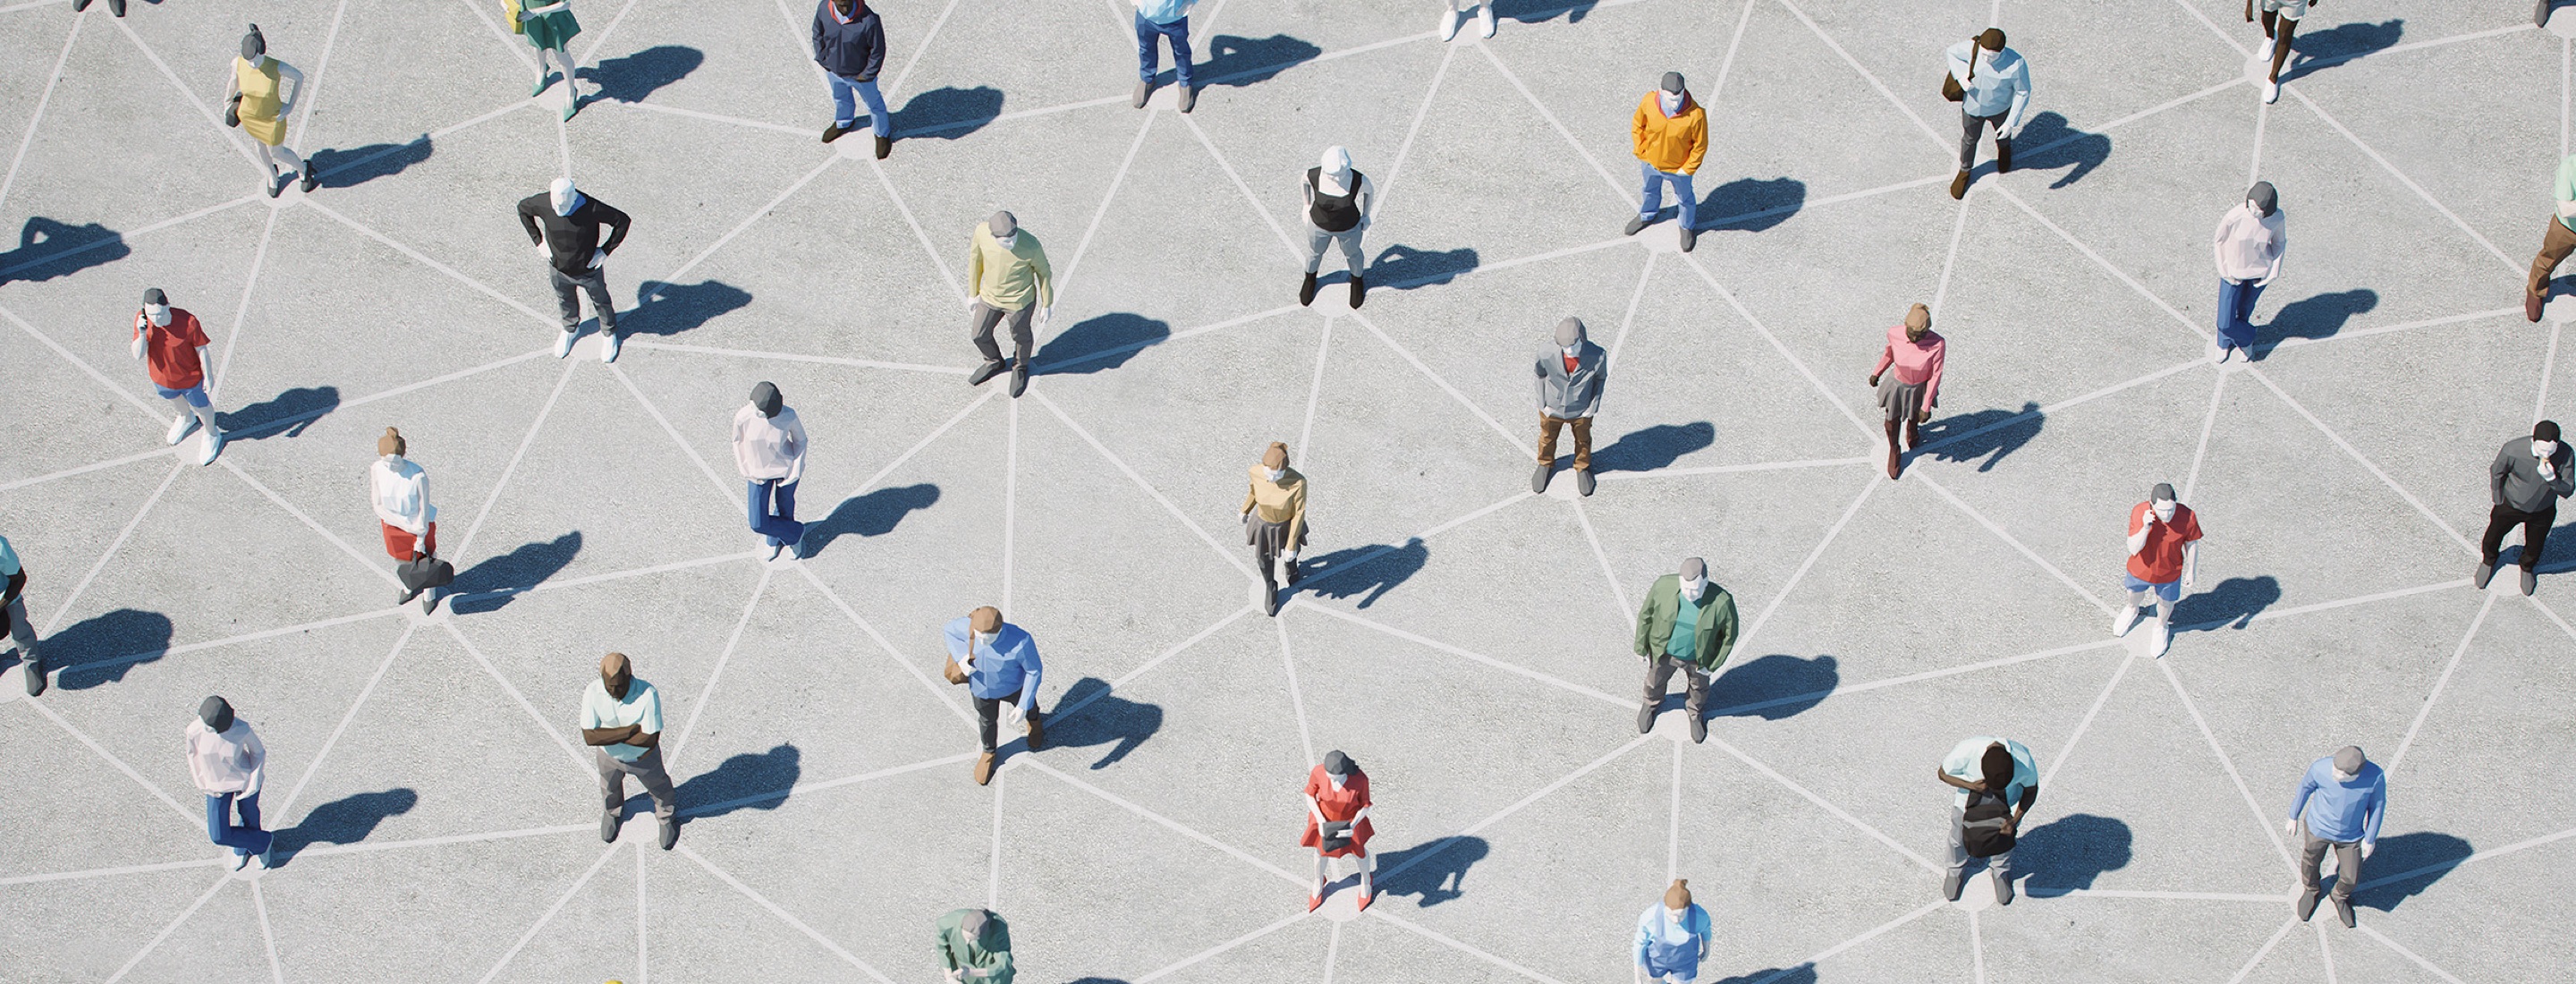 Aerial view of digitally rendered people socially distanced